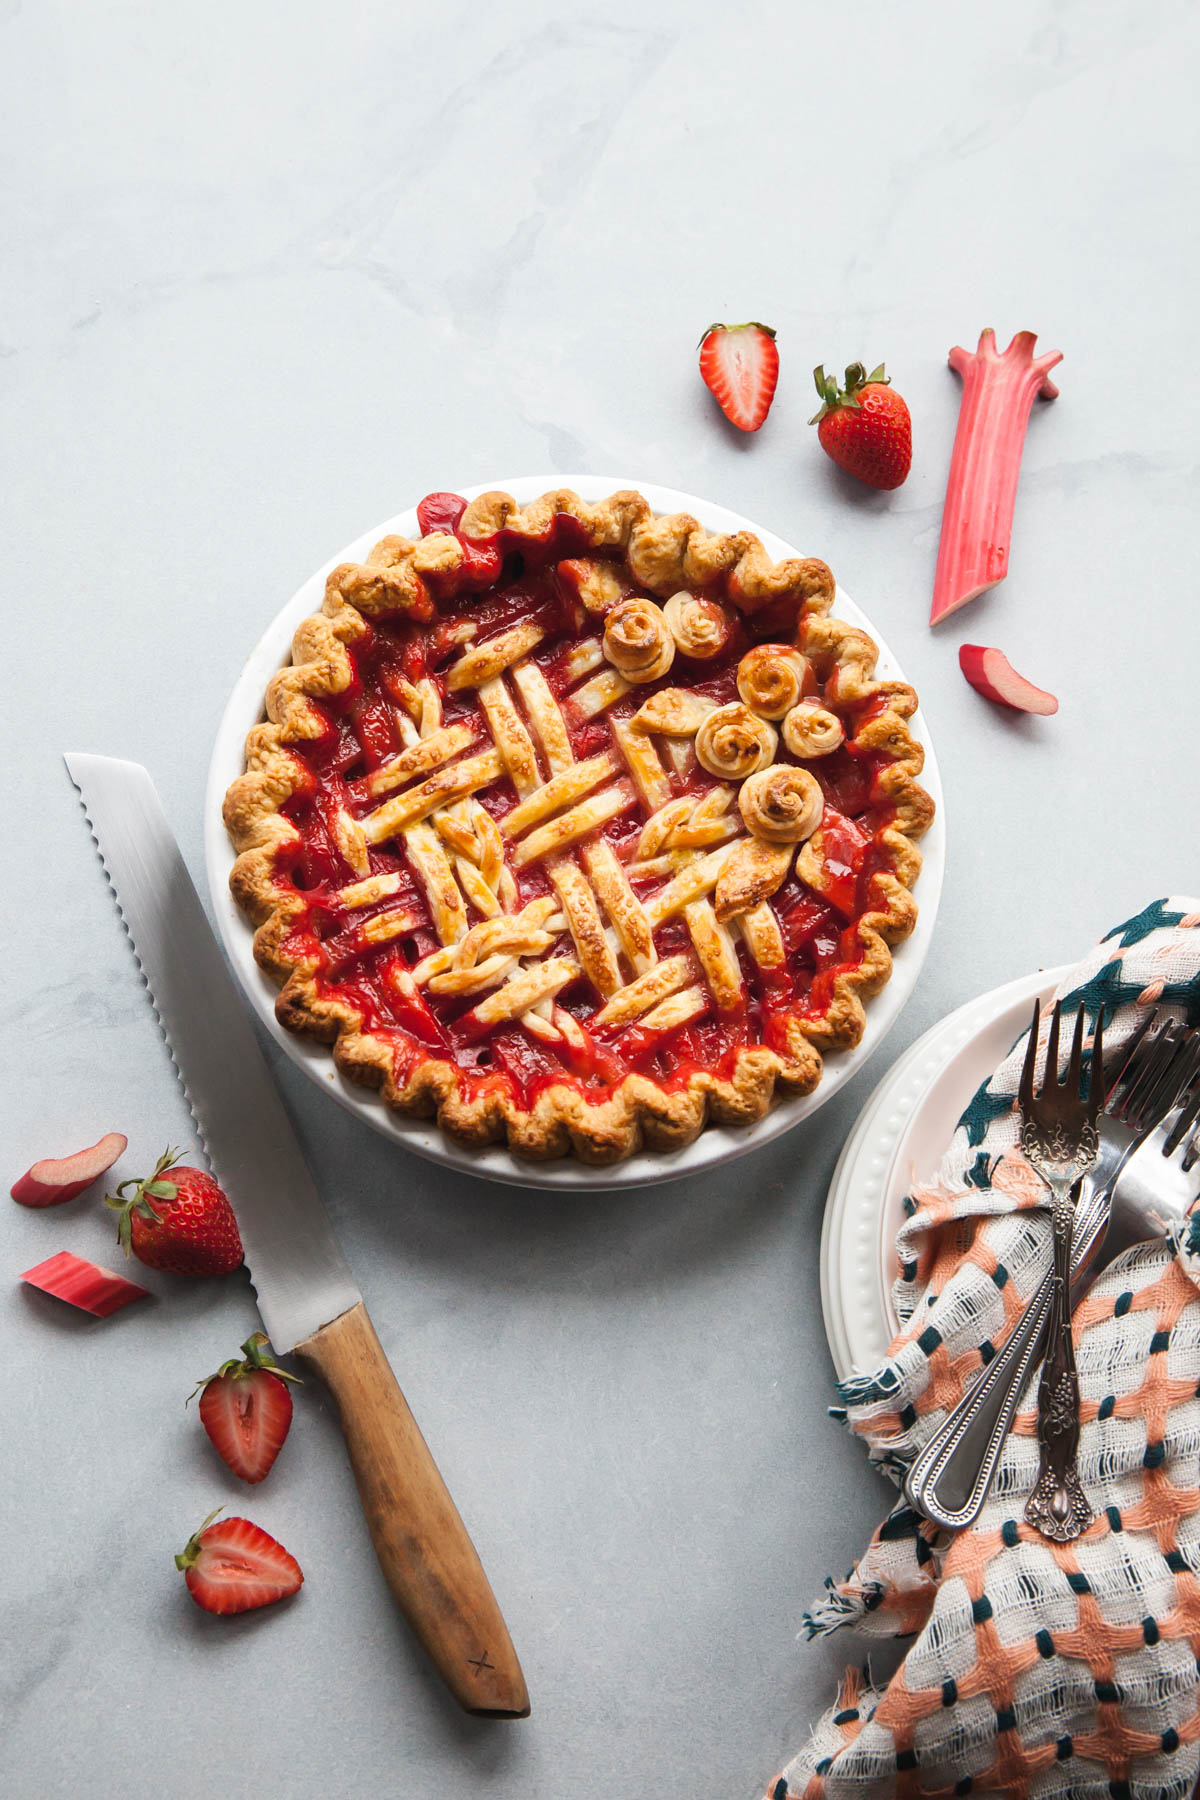 A baked strawberry rhubarb pie with jammy red filling in an all butter crust